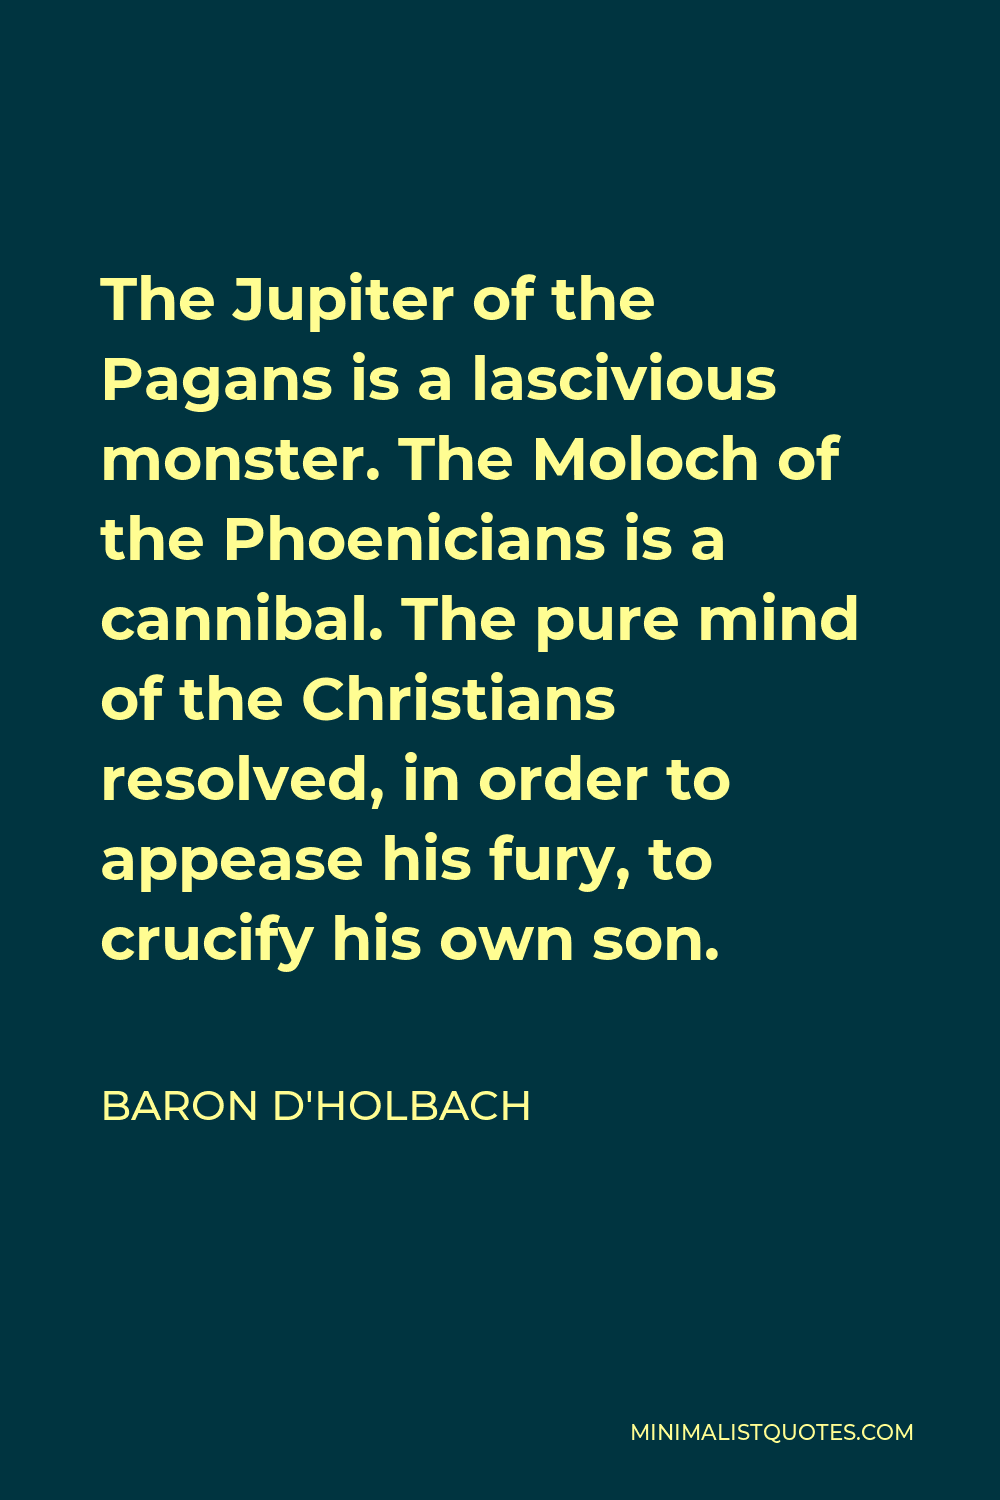 Baron d'Holbach Quote - The Jupiter of the Pagans is a lascivious monster. The Moloch of the Phoenicians is a cannibal. The pure mind of the Christians resolved, in order to appease his fury, to crucify his own son.